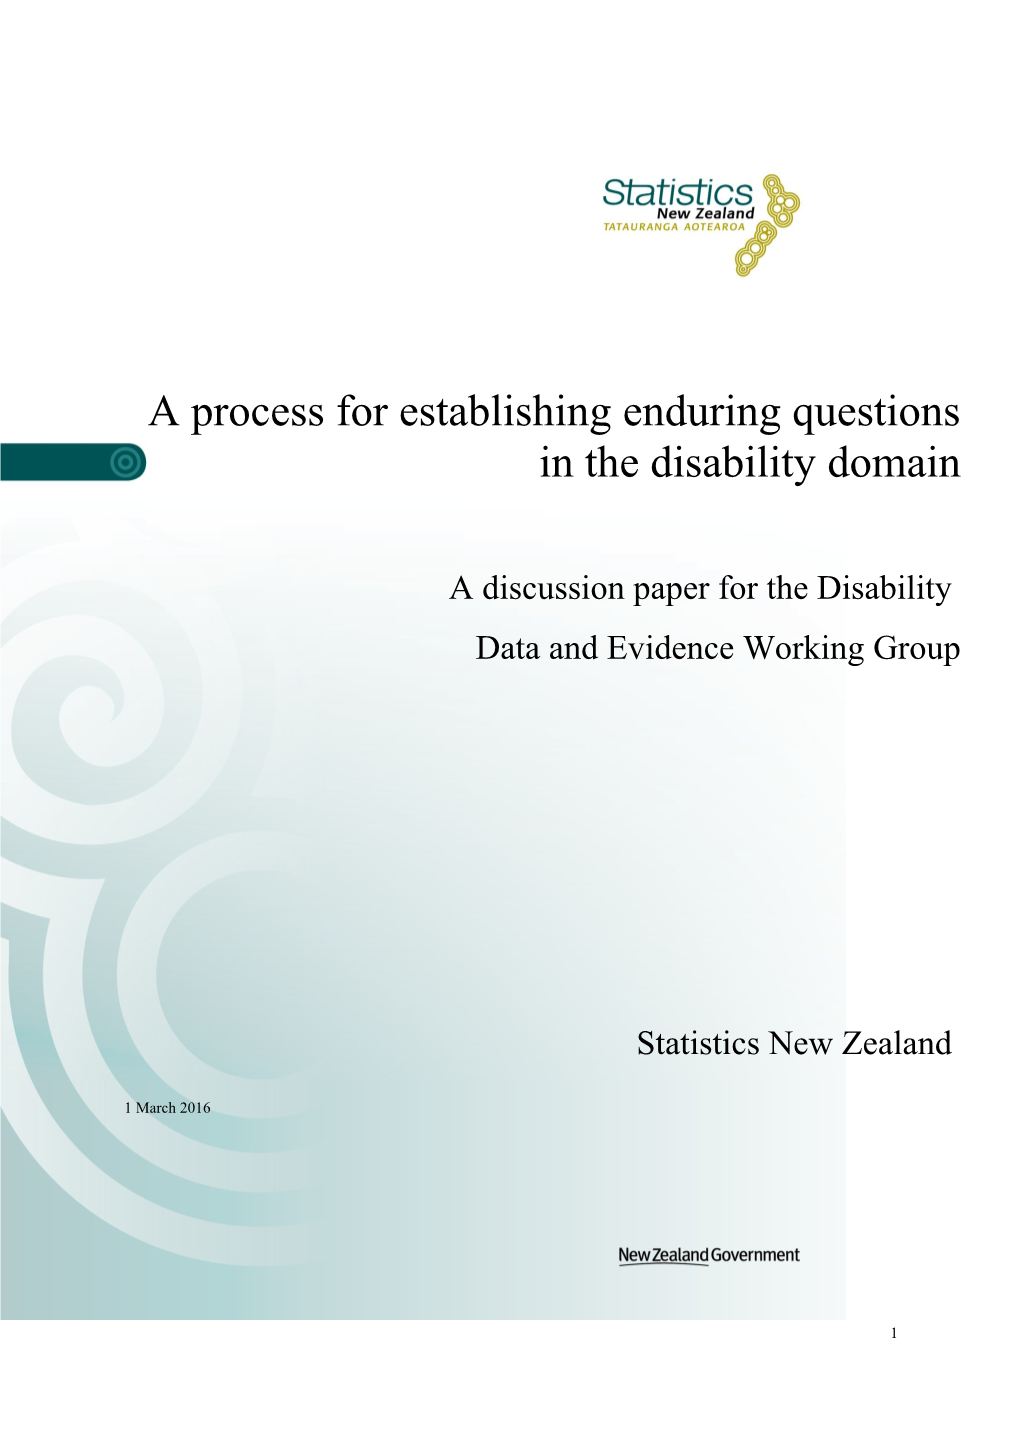 A Process for Establishing Enduring Questions in the Disability Domain